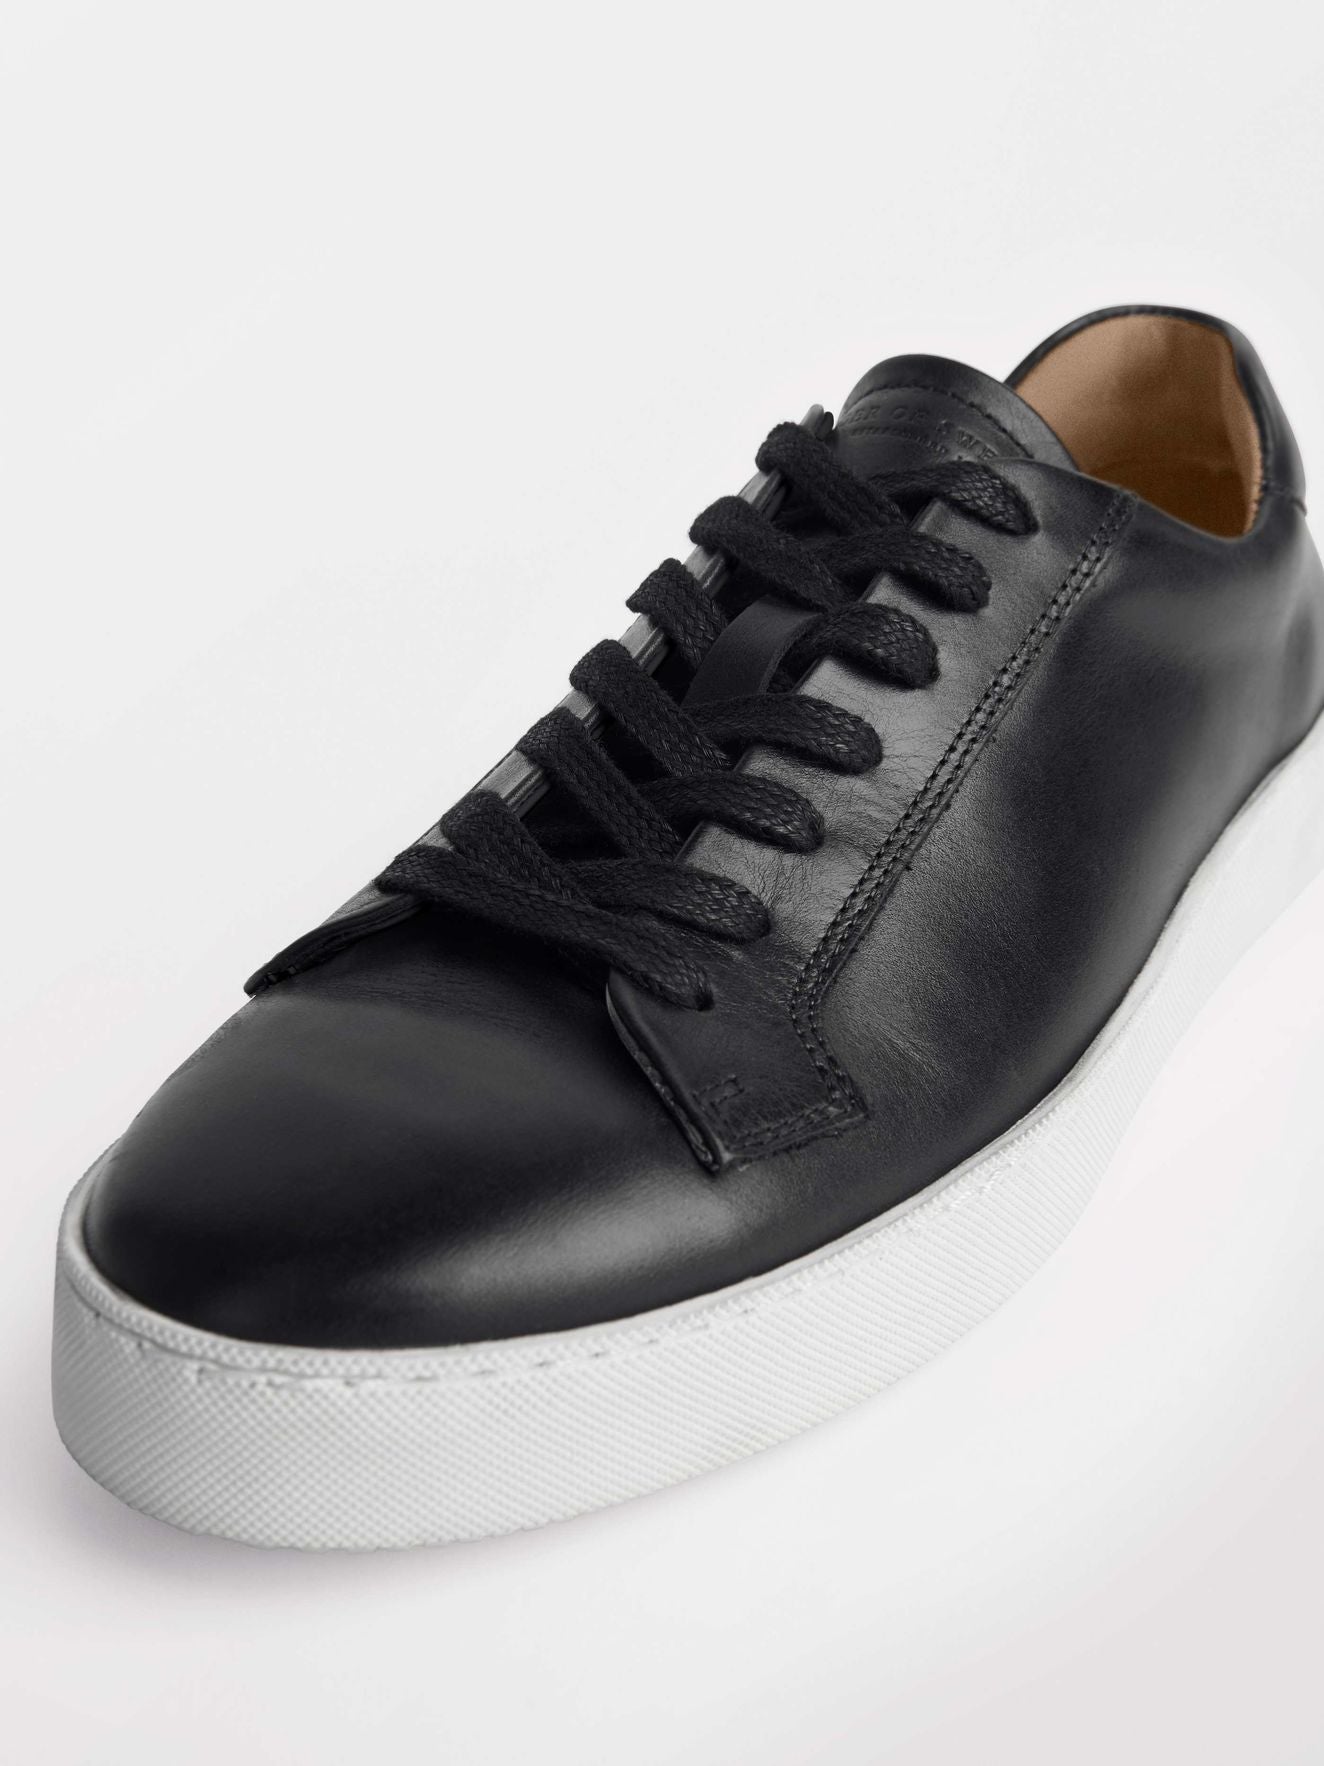 Tiger Of Sweden Salas Sneakers Black - Mojo Independent Store